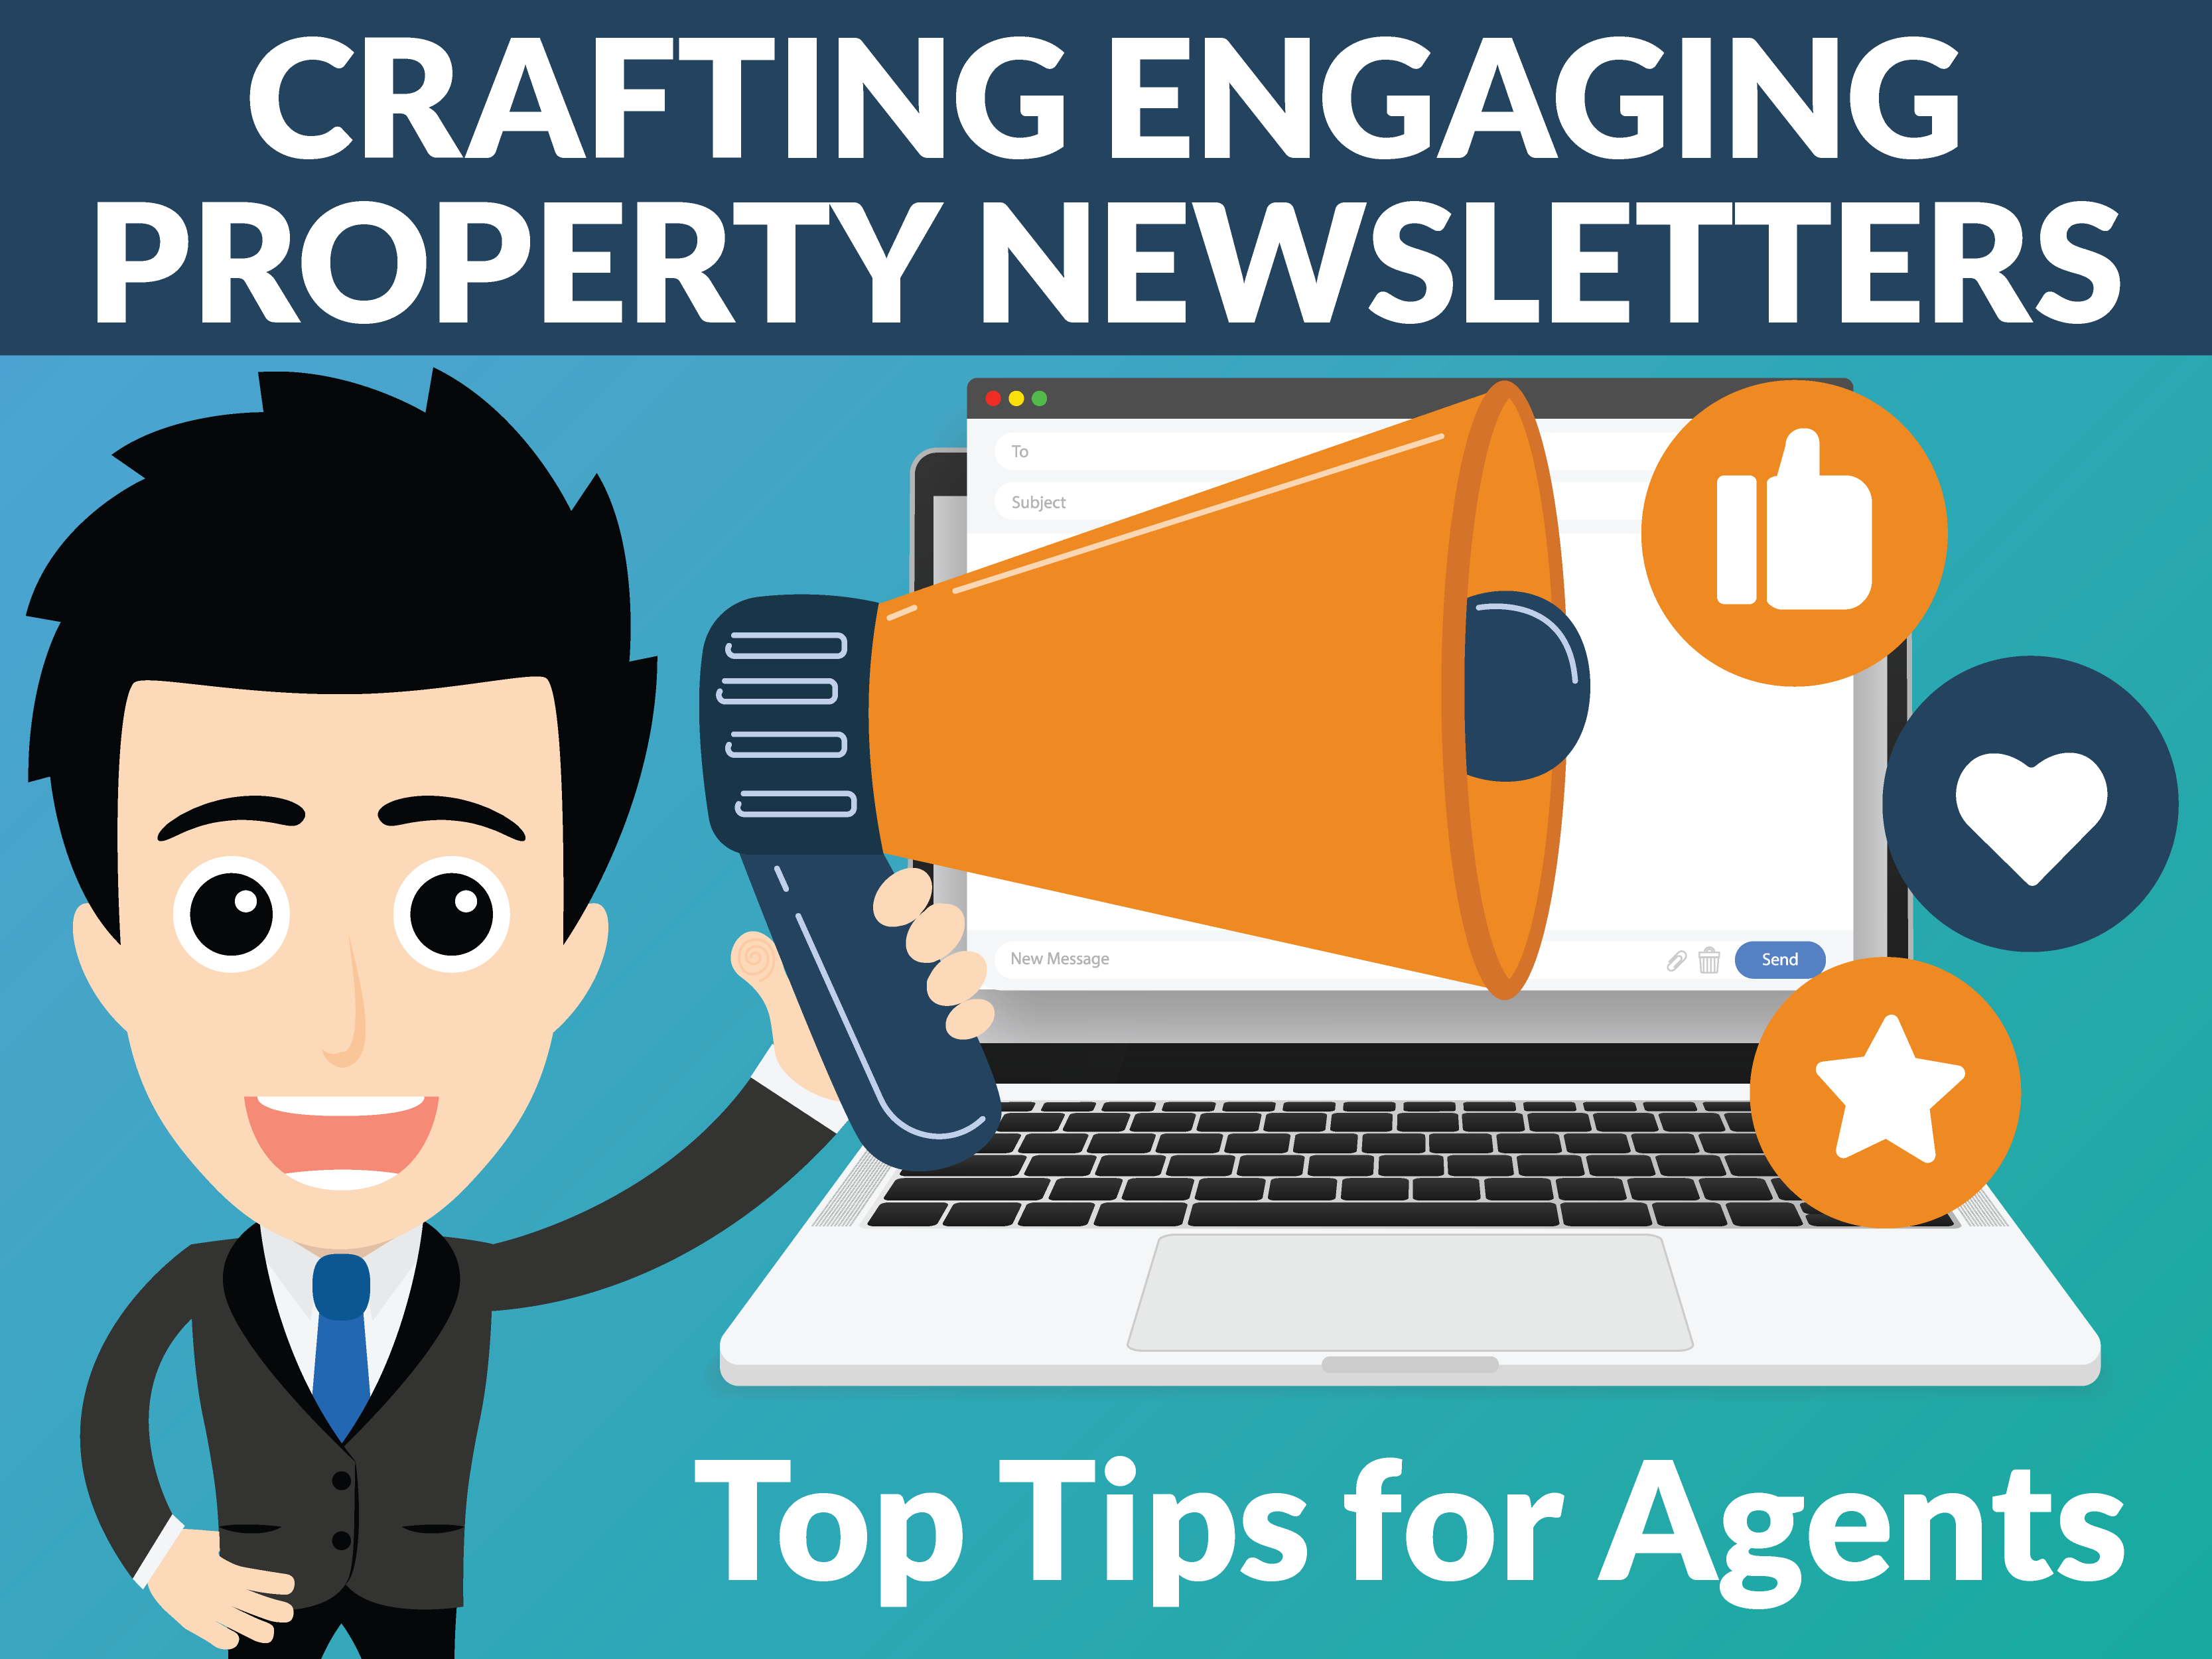 Crafting Engaging Property Newsletters: Top Tips for Agents